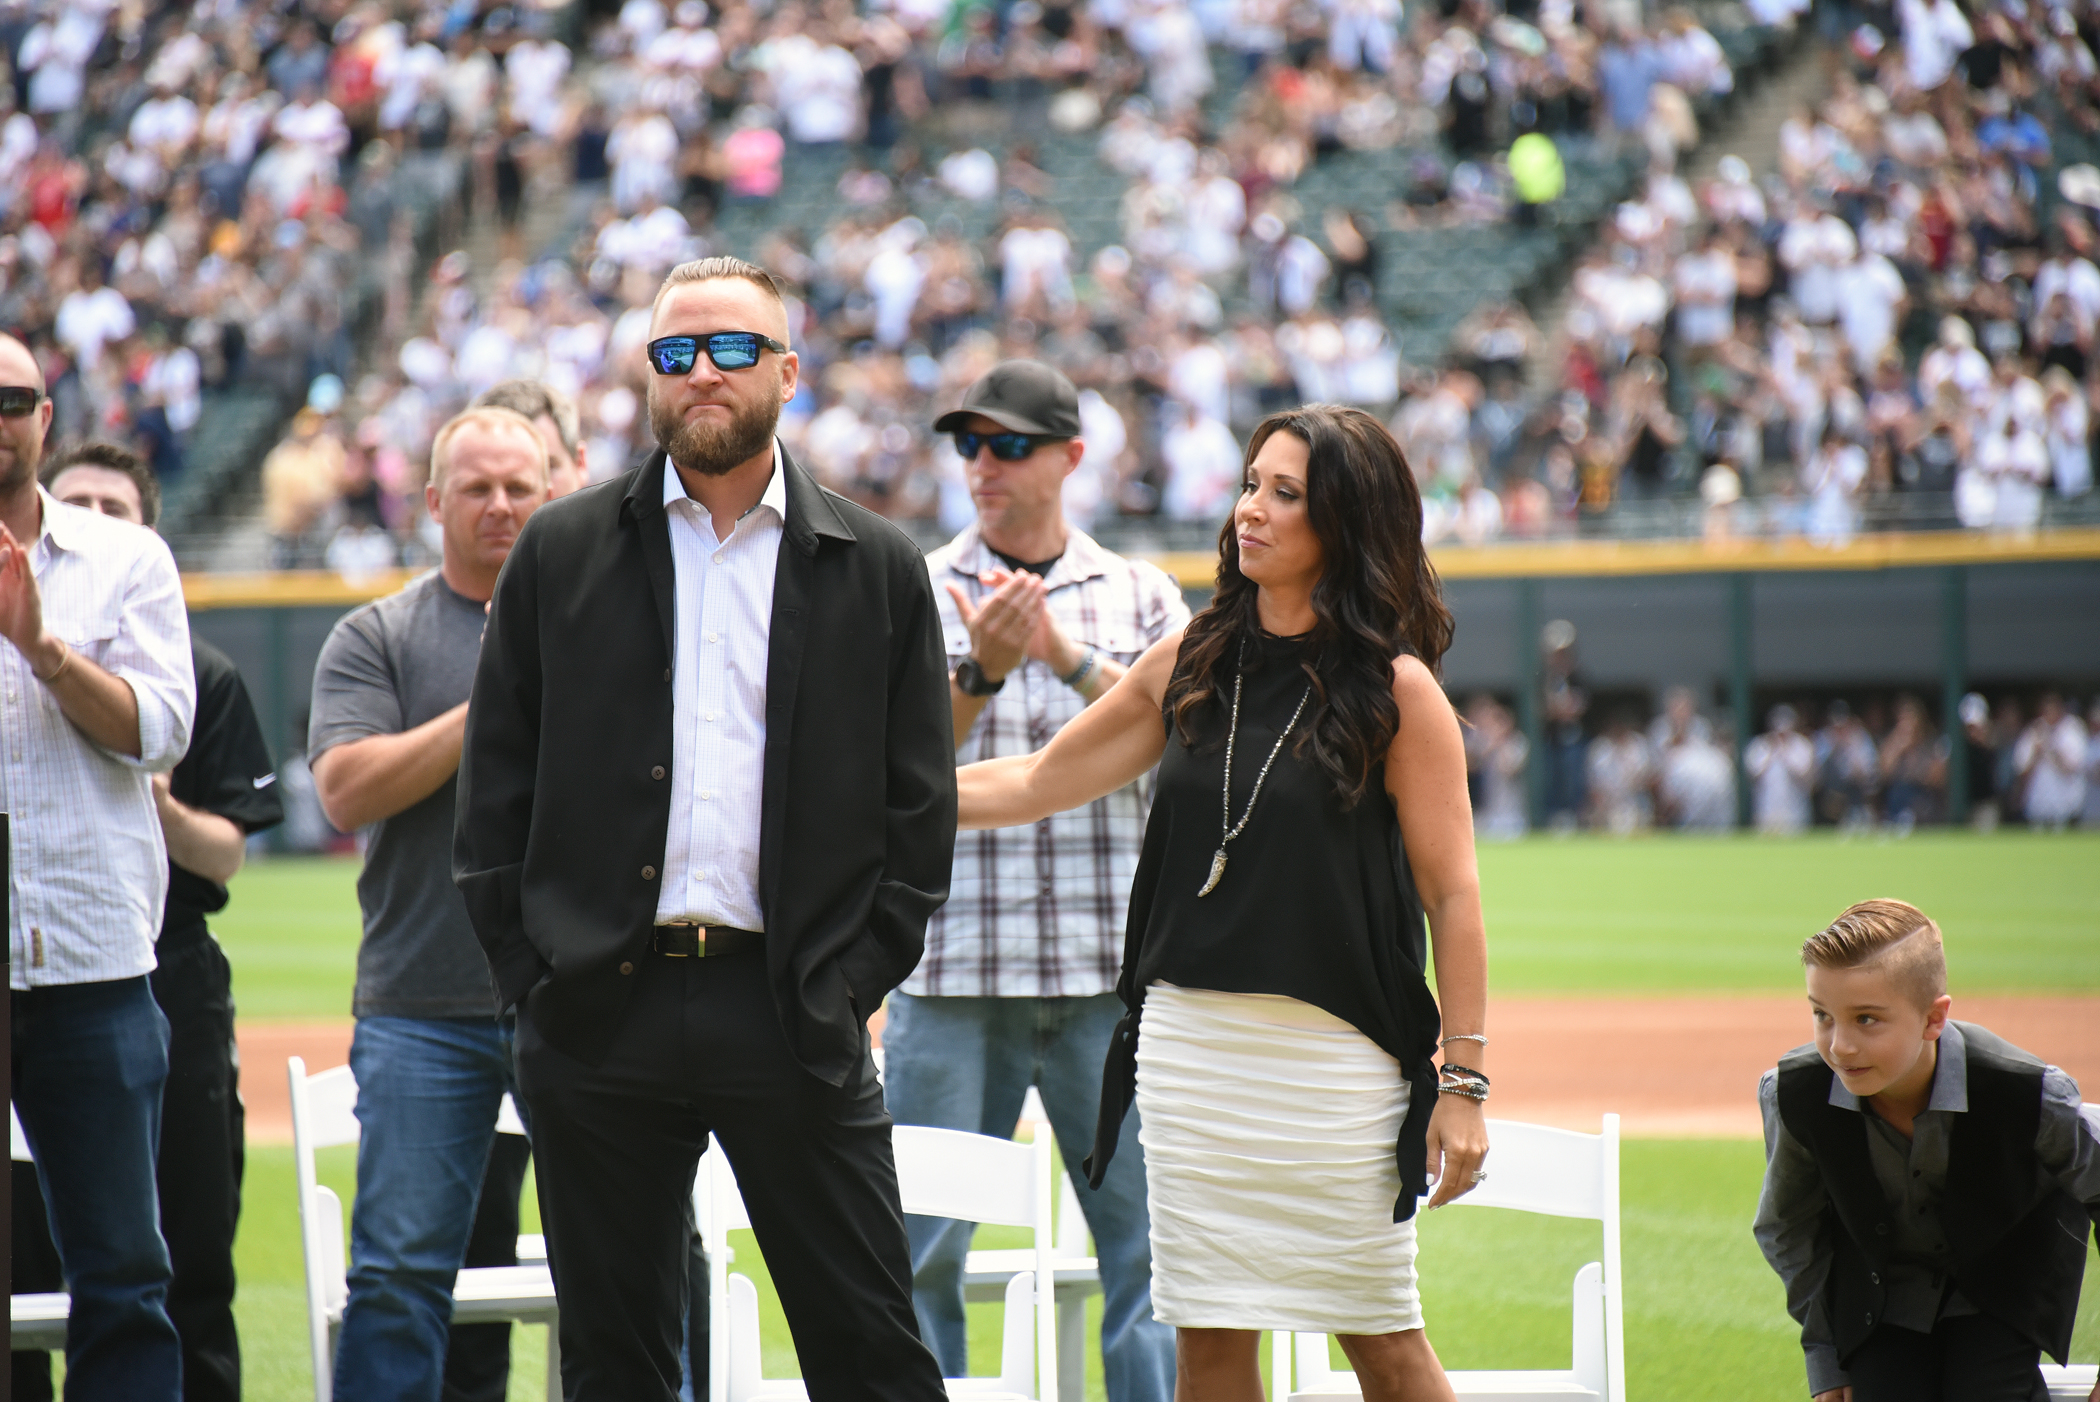 Mark Buehrle on his quiet retirement: 'I wanted to sneak my way out